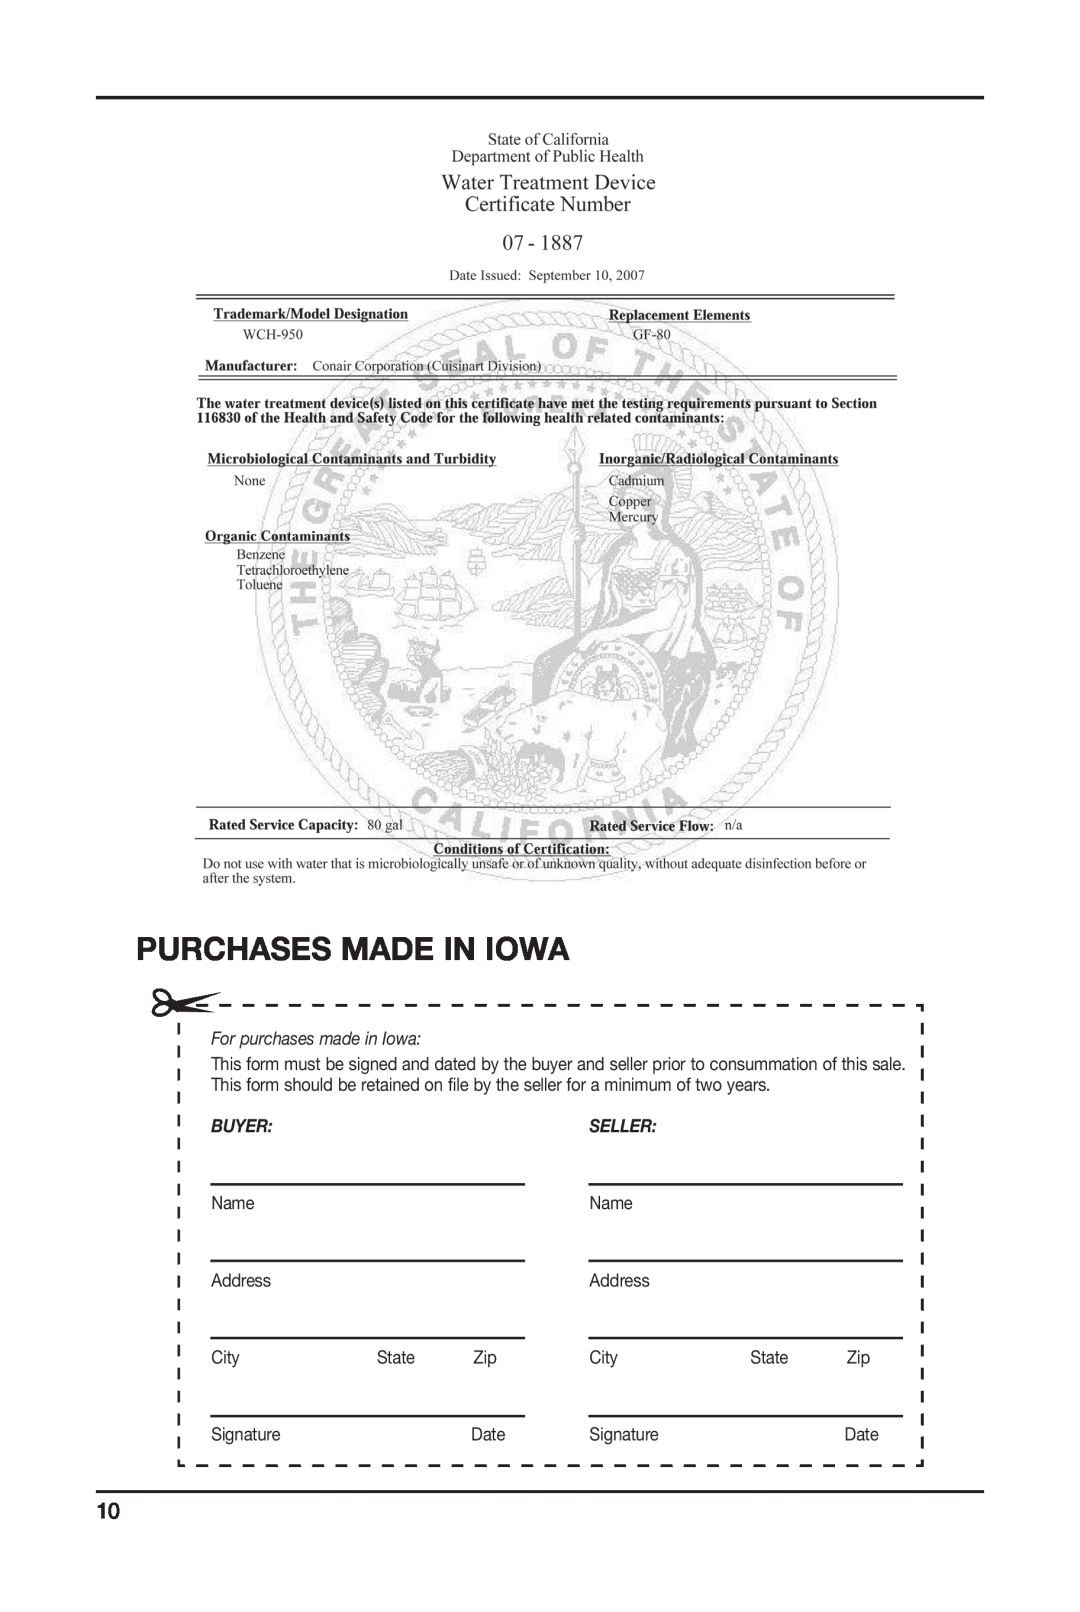 Cuisinart WCH-950 manual Purchases Made In Iowa, For purchases made in Iowa, Buyer:Seller 